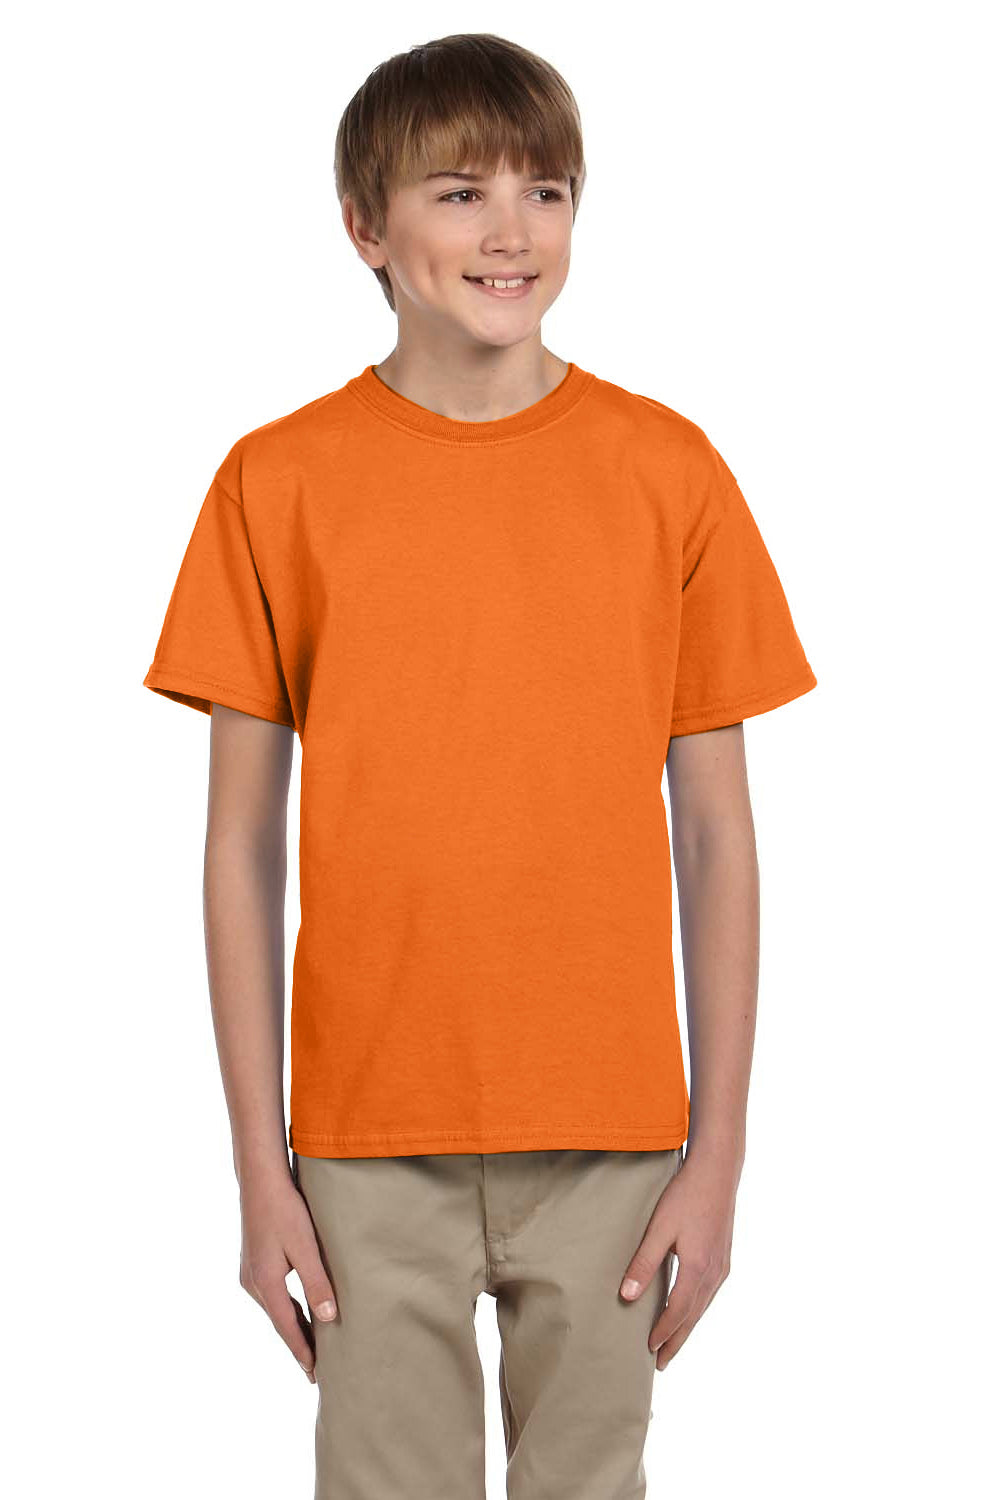 Fruit Of The Loom 3931B Youth HD Jersey Short Sleeve Crewneck T-Shirt Safety Orange Front